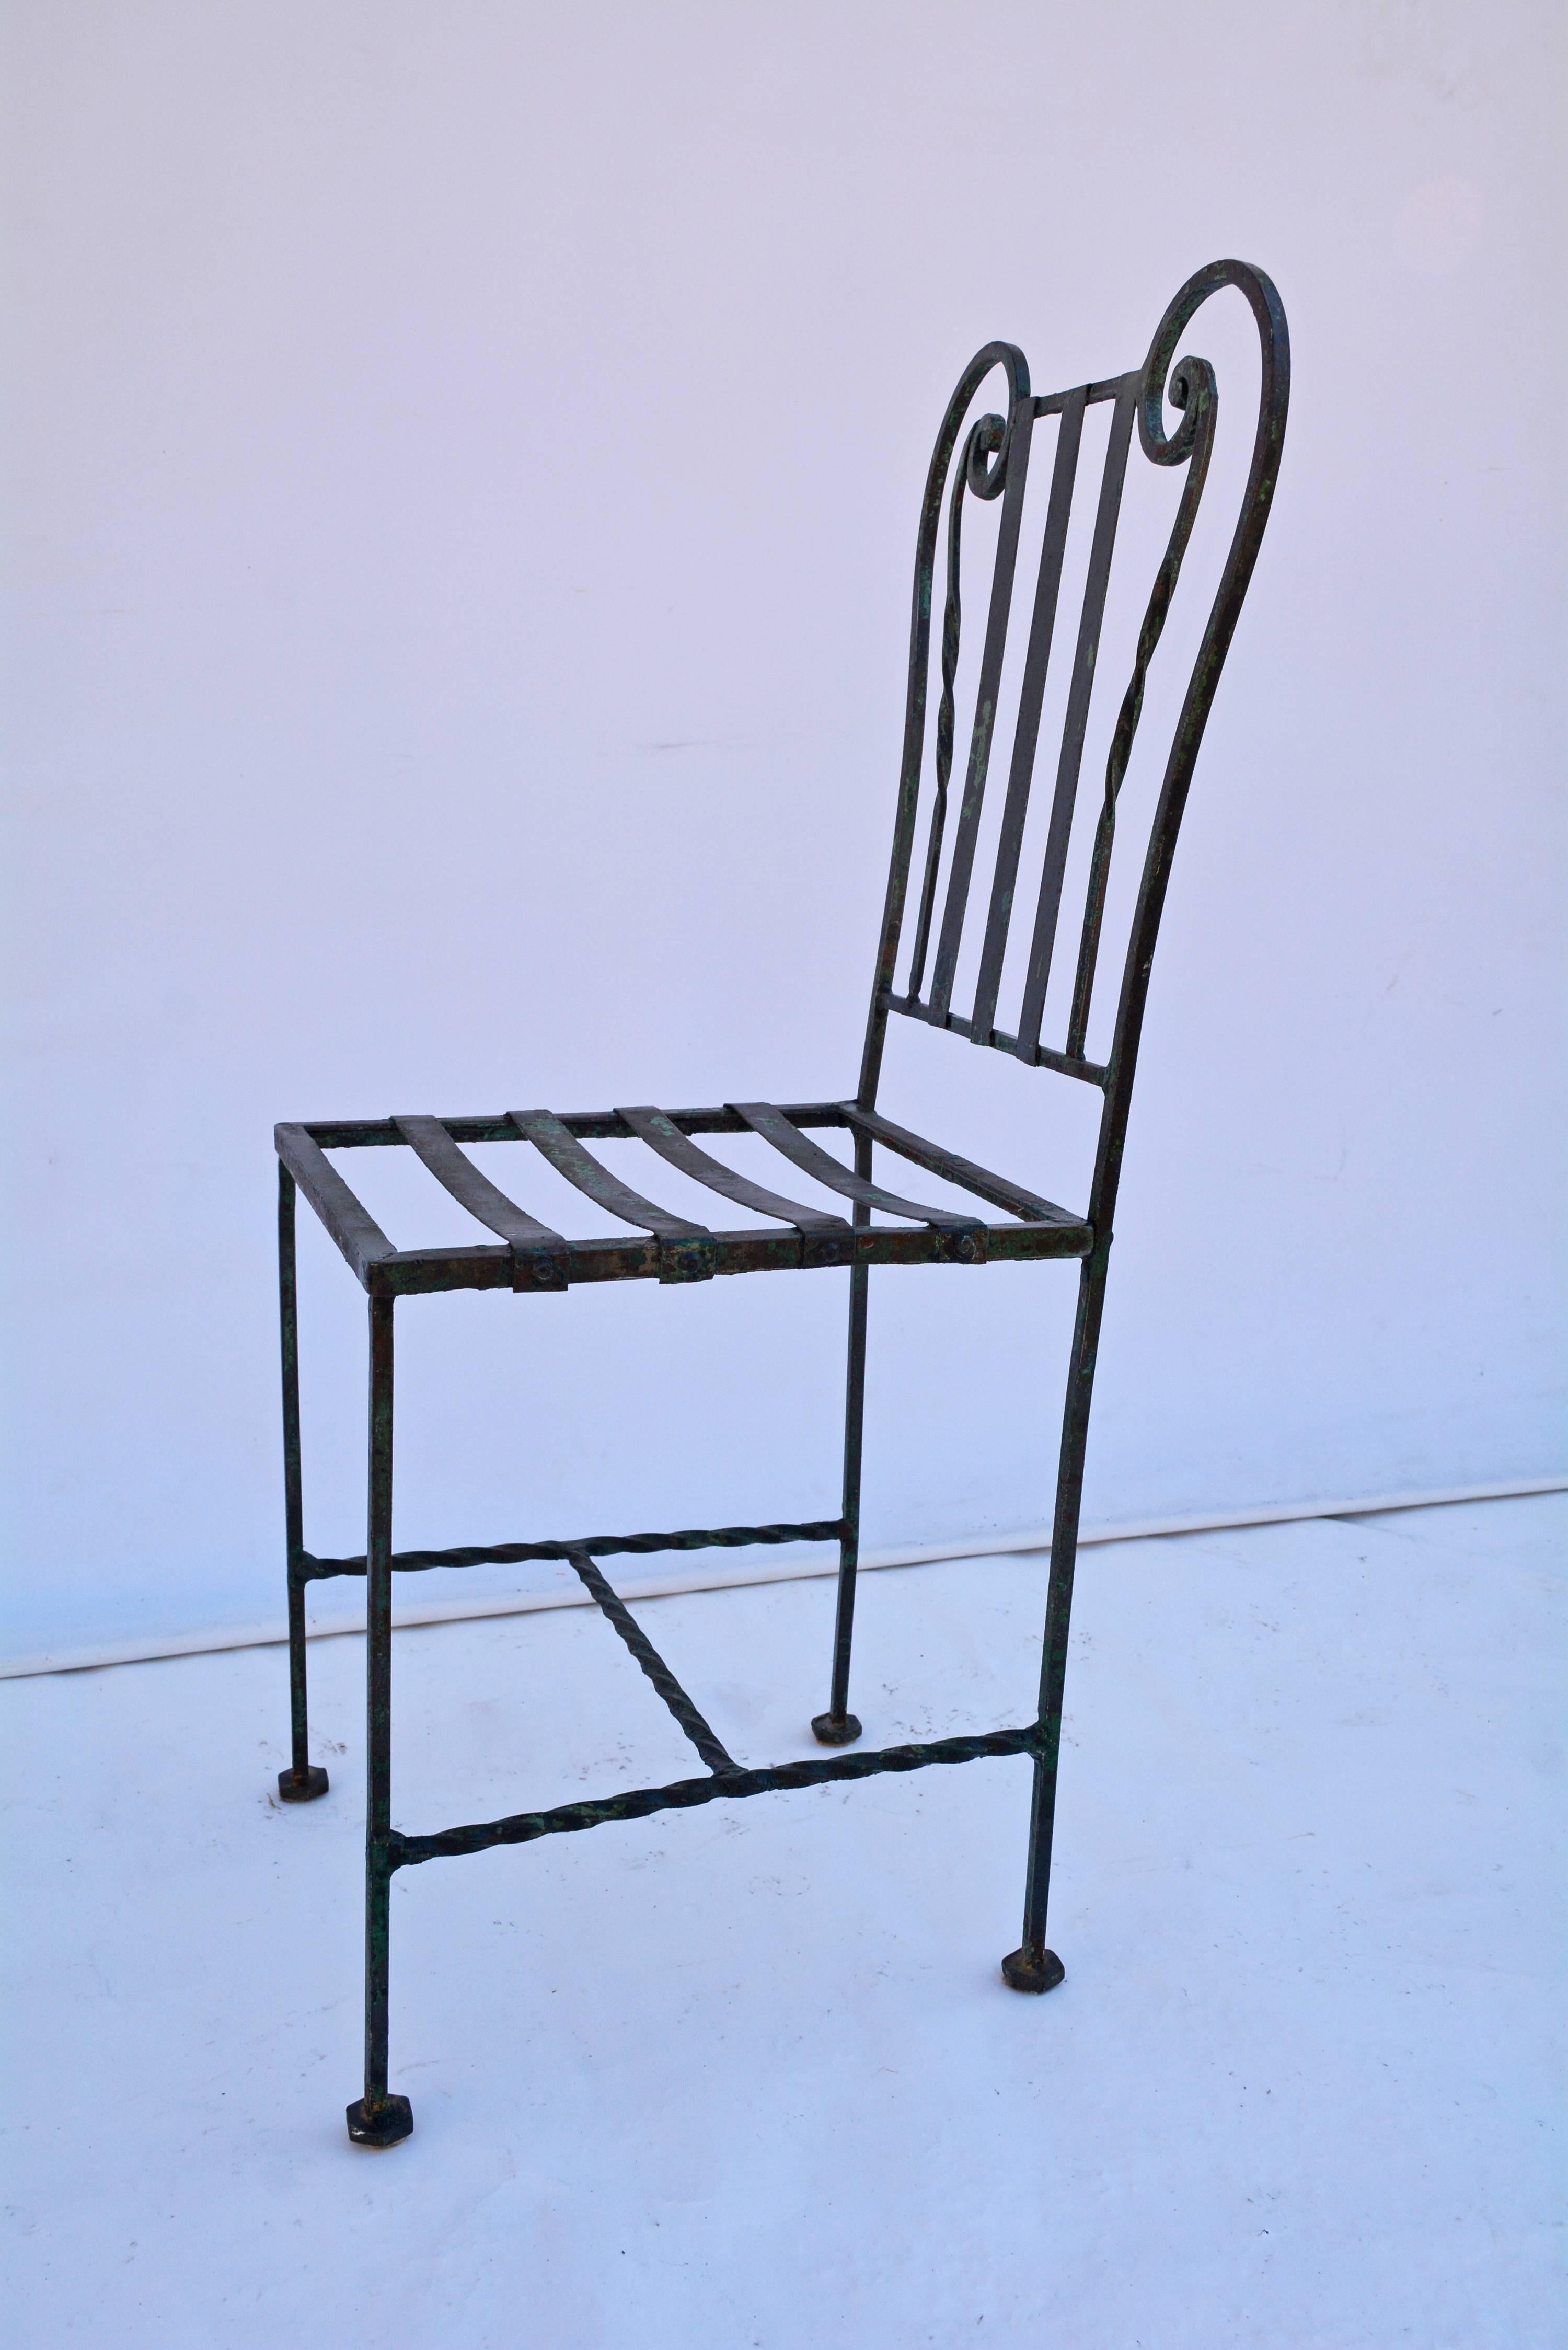 Highly decorative metal indoor or outdoor side chair has a Lyre-style back and seat slats to hold a cushion. Stretchers are spiral bars. Can be used as desk chair, vanity chair, or accent chair.